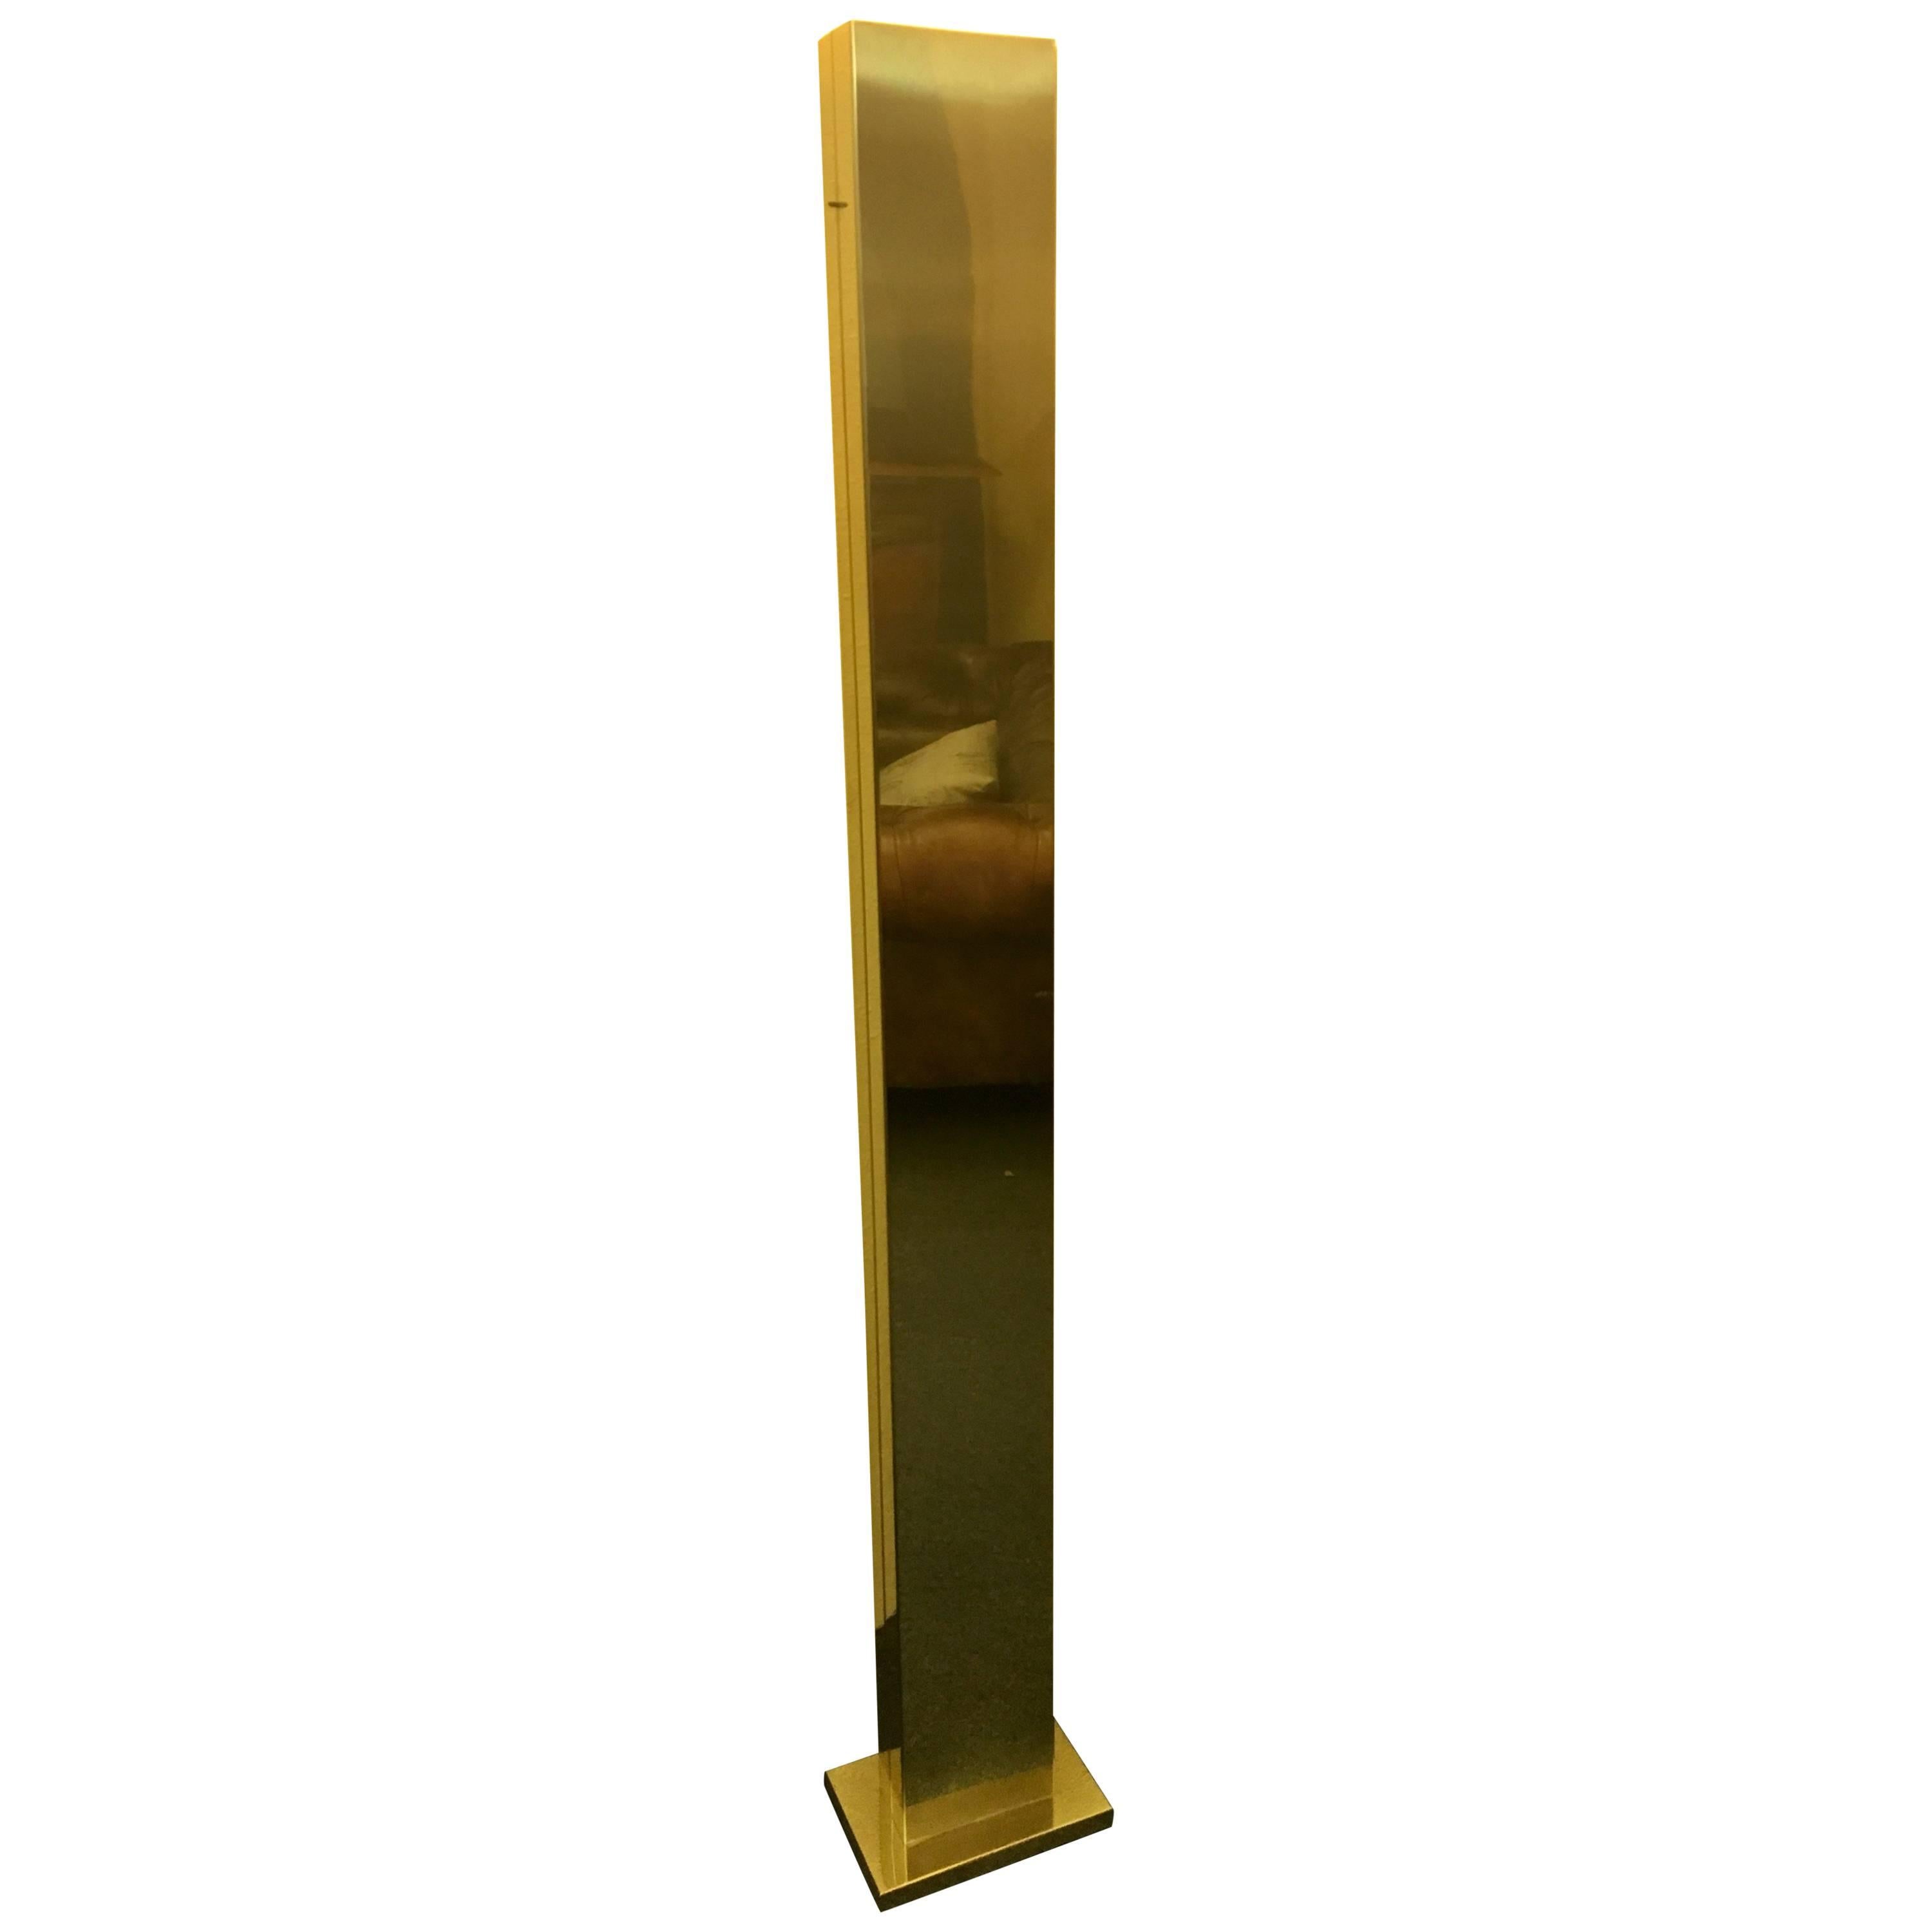 Elegant Polished Brass Torchiere Floor Lamp by Casella Lighting